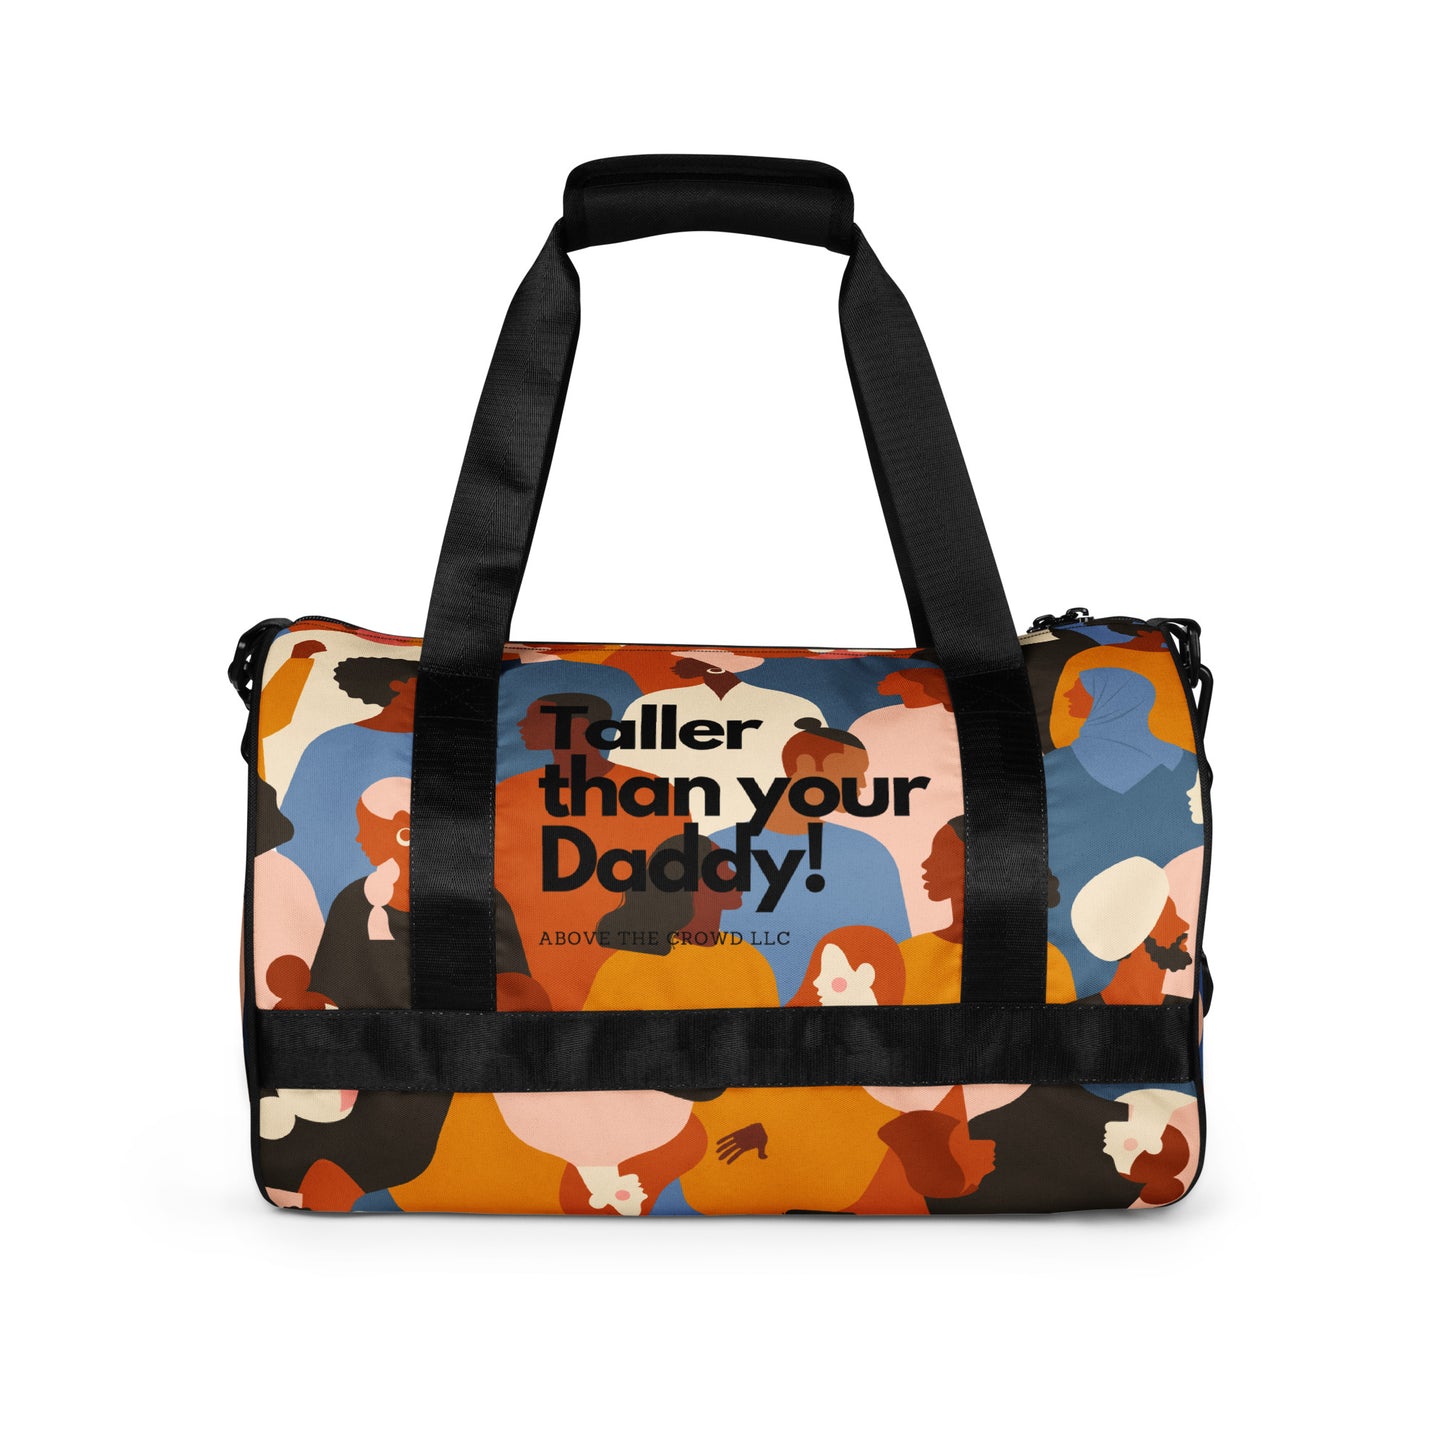 Limited Edition Diversity 'Taller than your Daddy' Gym Bag